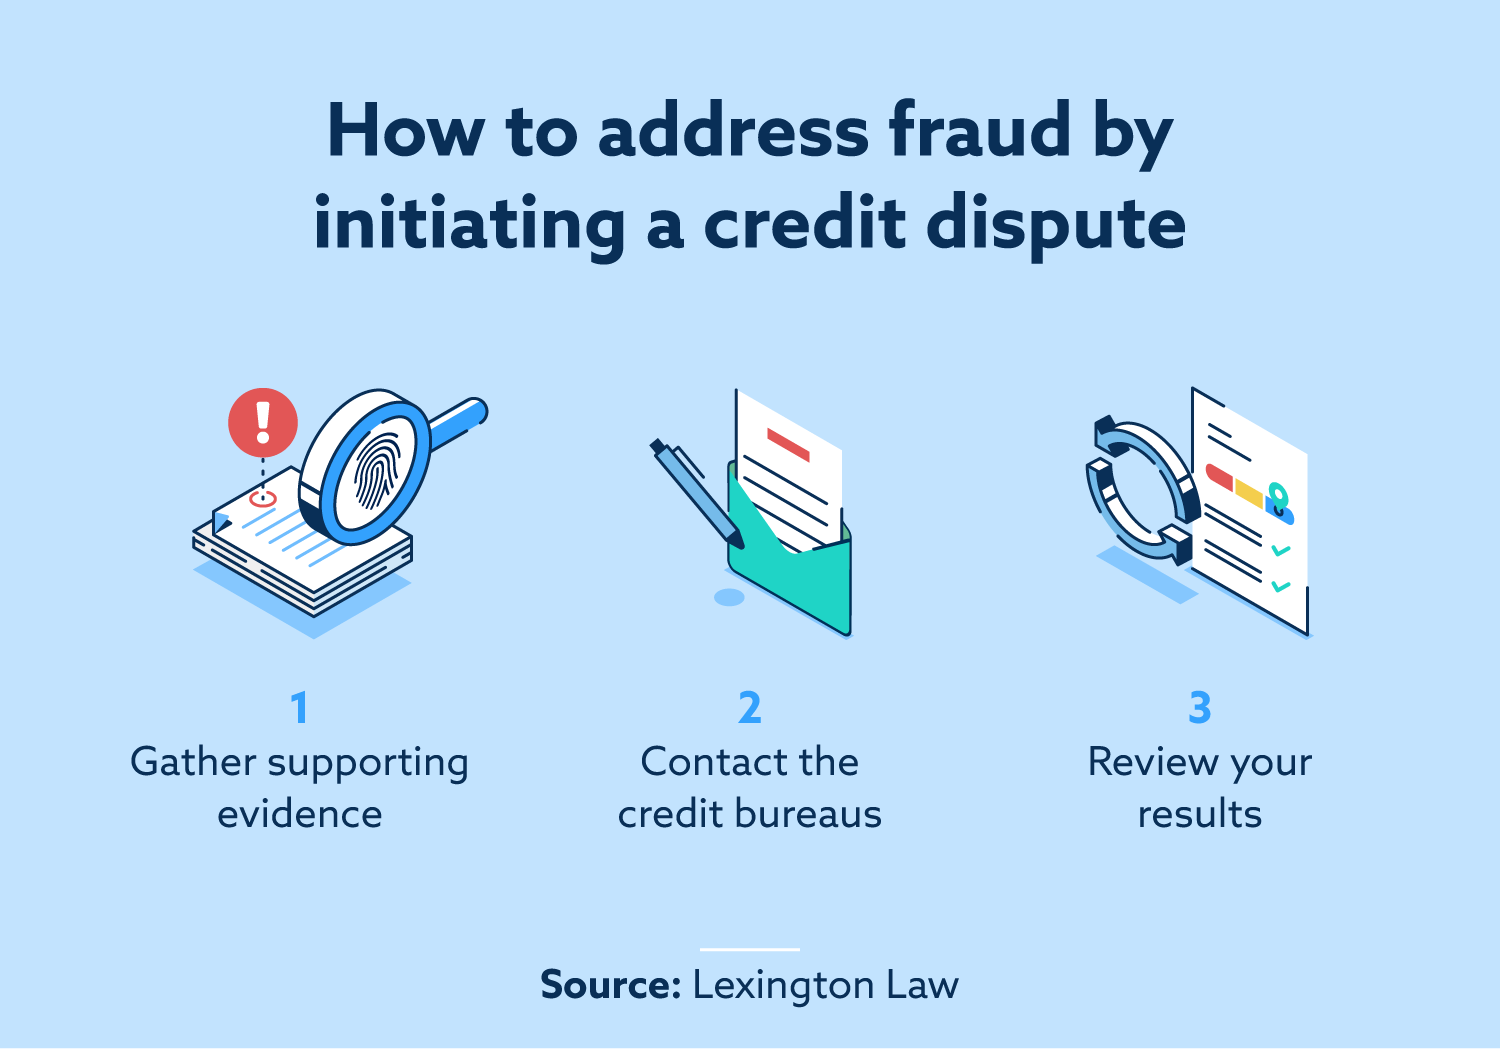 How to address fraud by initiating a credit dispute